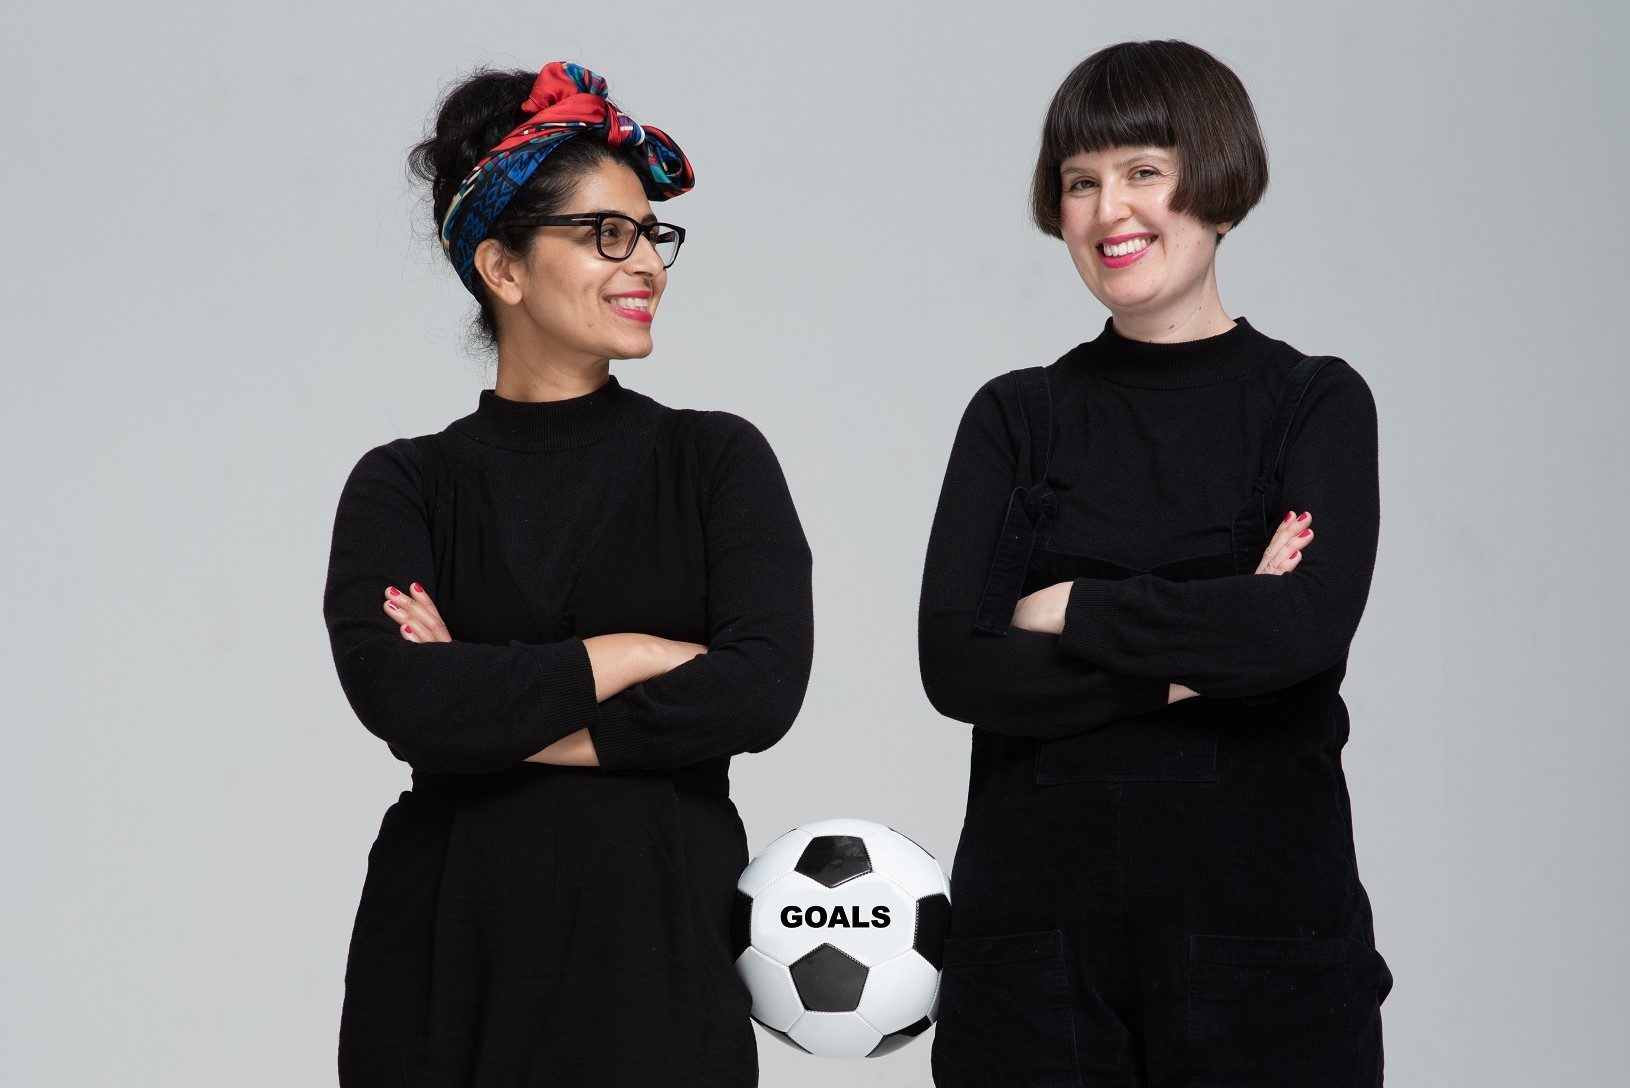 Two women wearing black stand with their arms crossed. There is a football balanced on their hips between them.